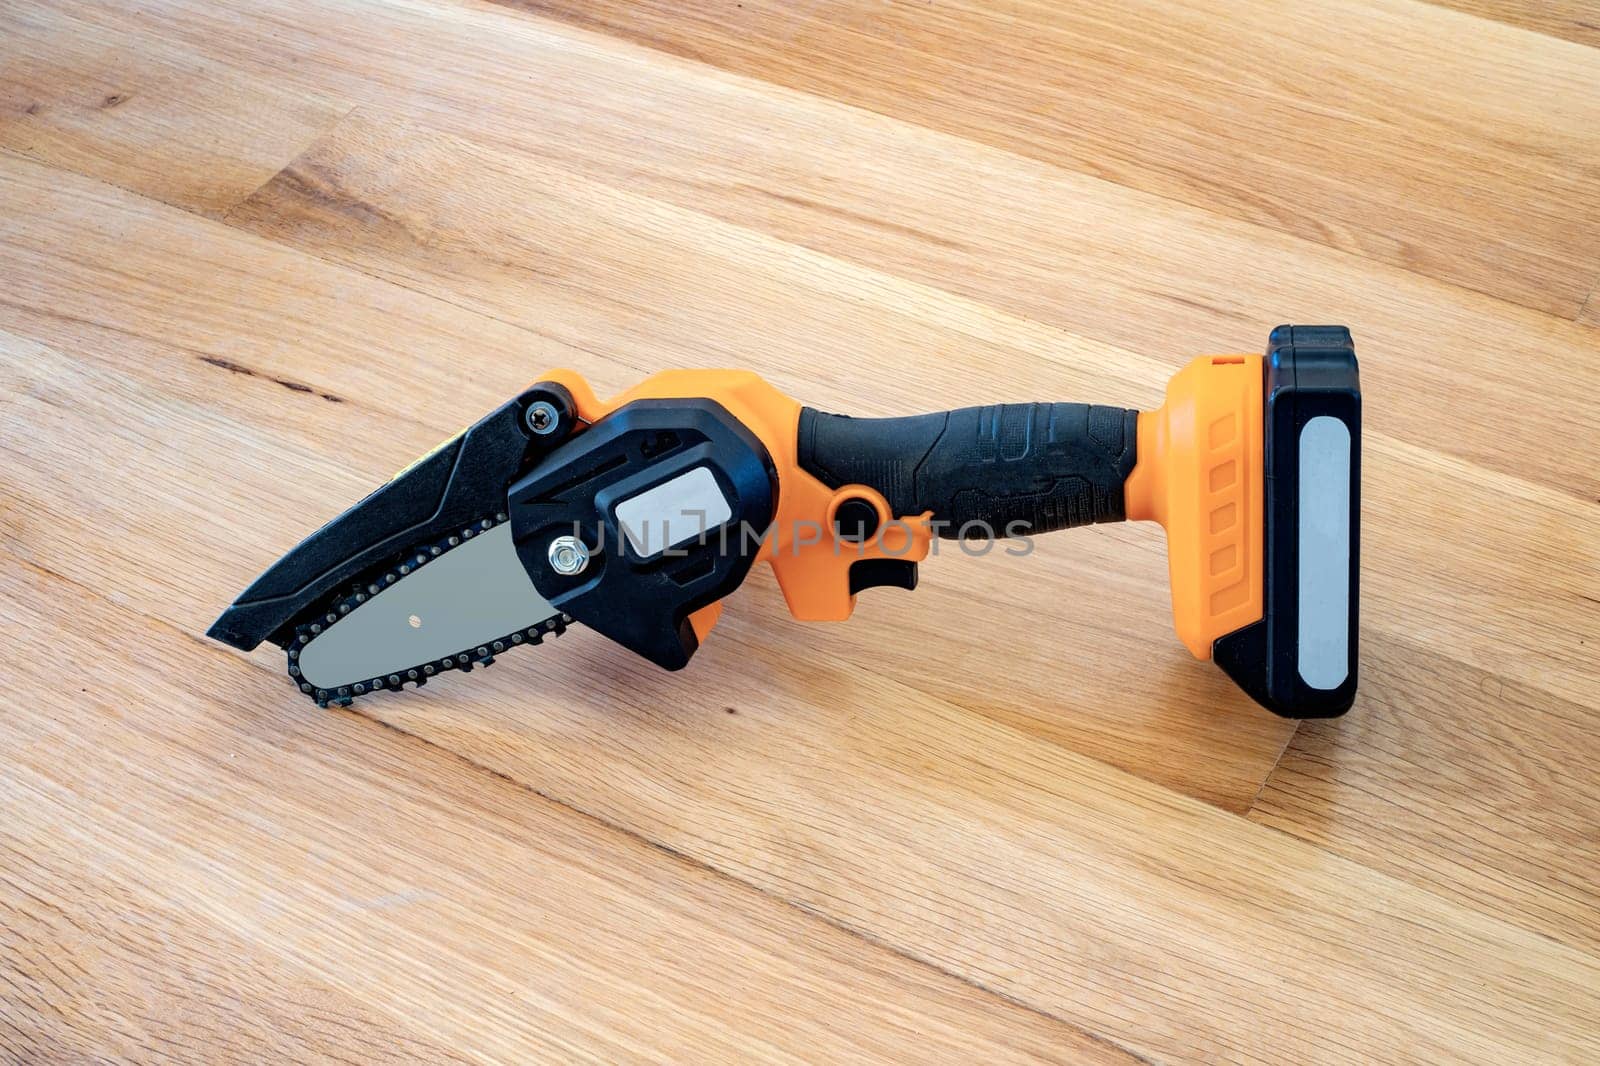 small accumulator chainsaw to trim broken branches of a tree  by EdVal